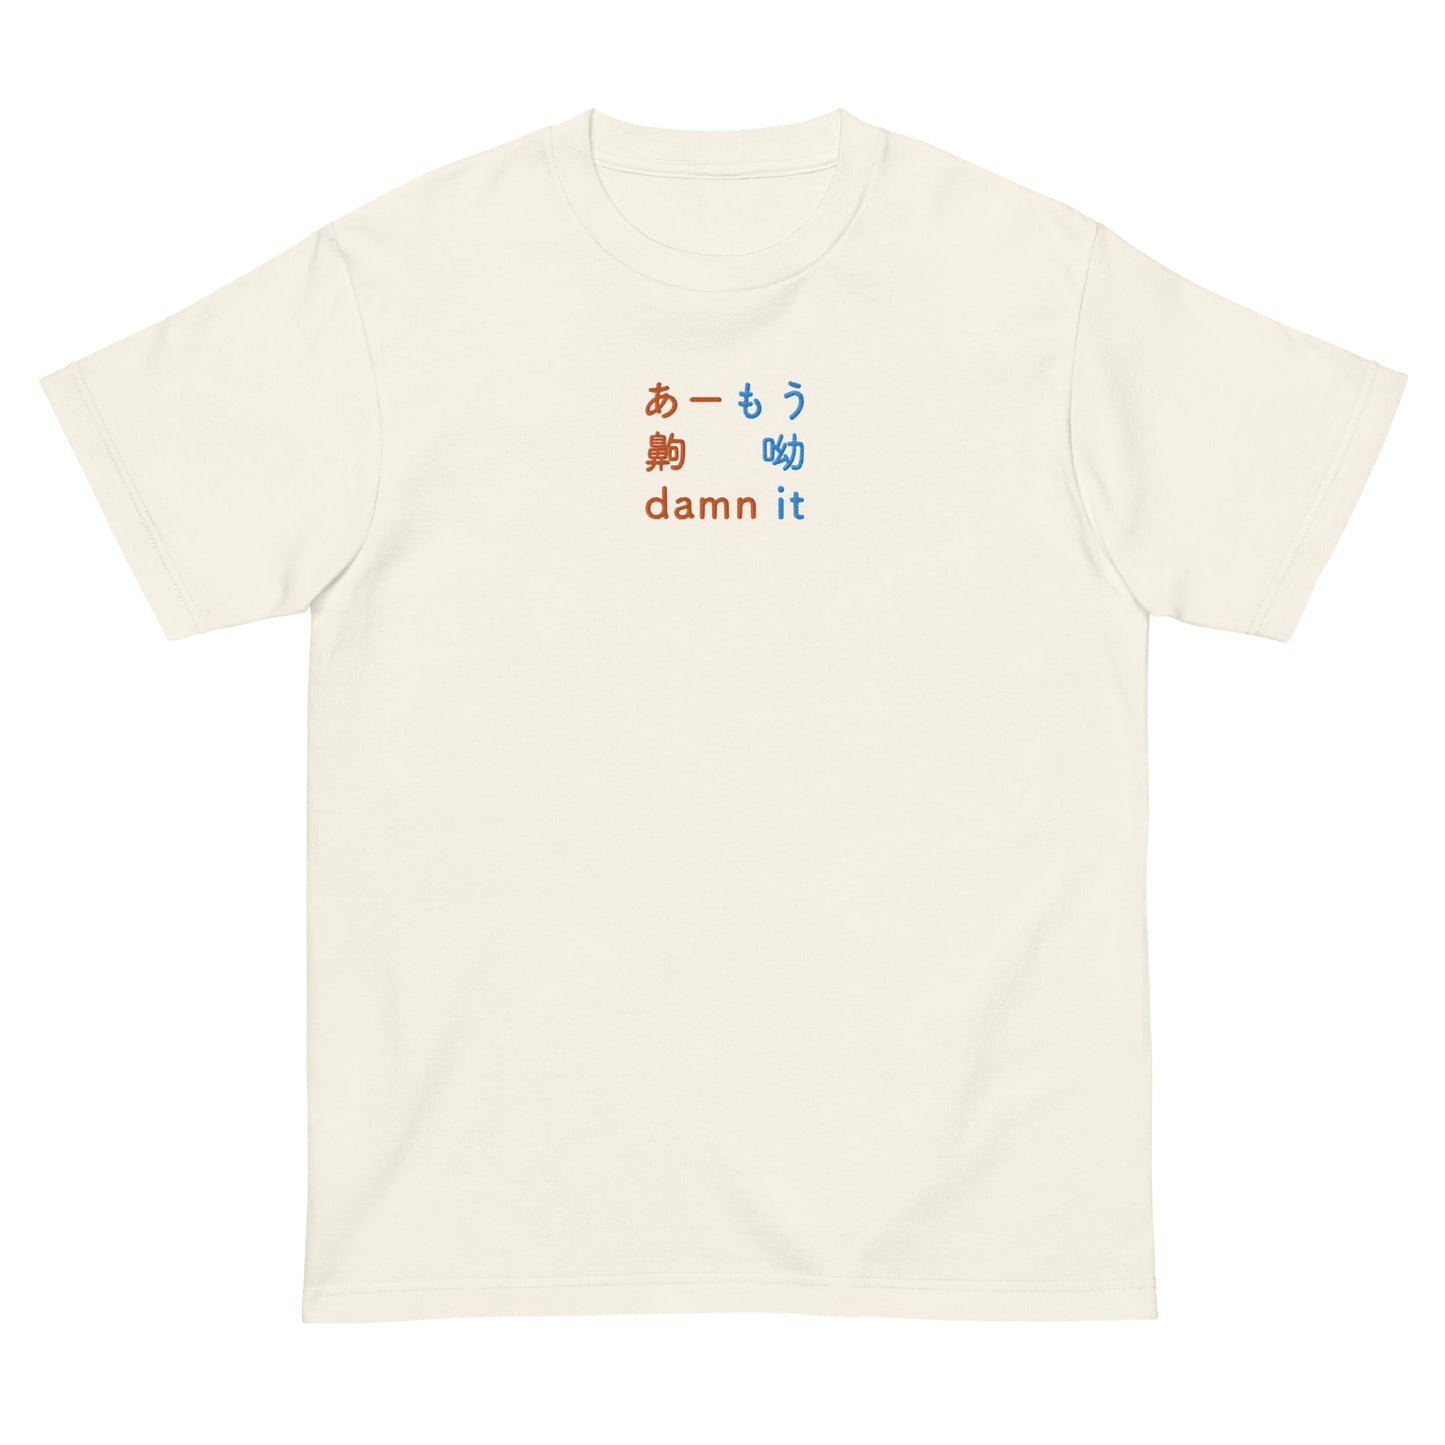 Ivory High Quality Tee - Front Design with an Orange,Blue Embroidery "Damn it" in Japanese,Chinese and English